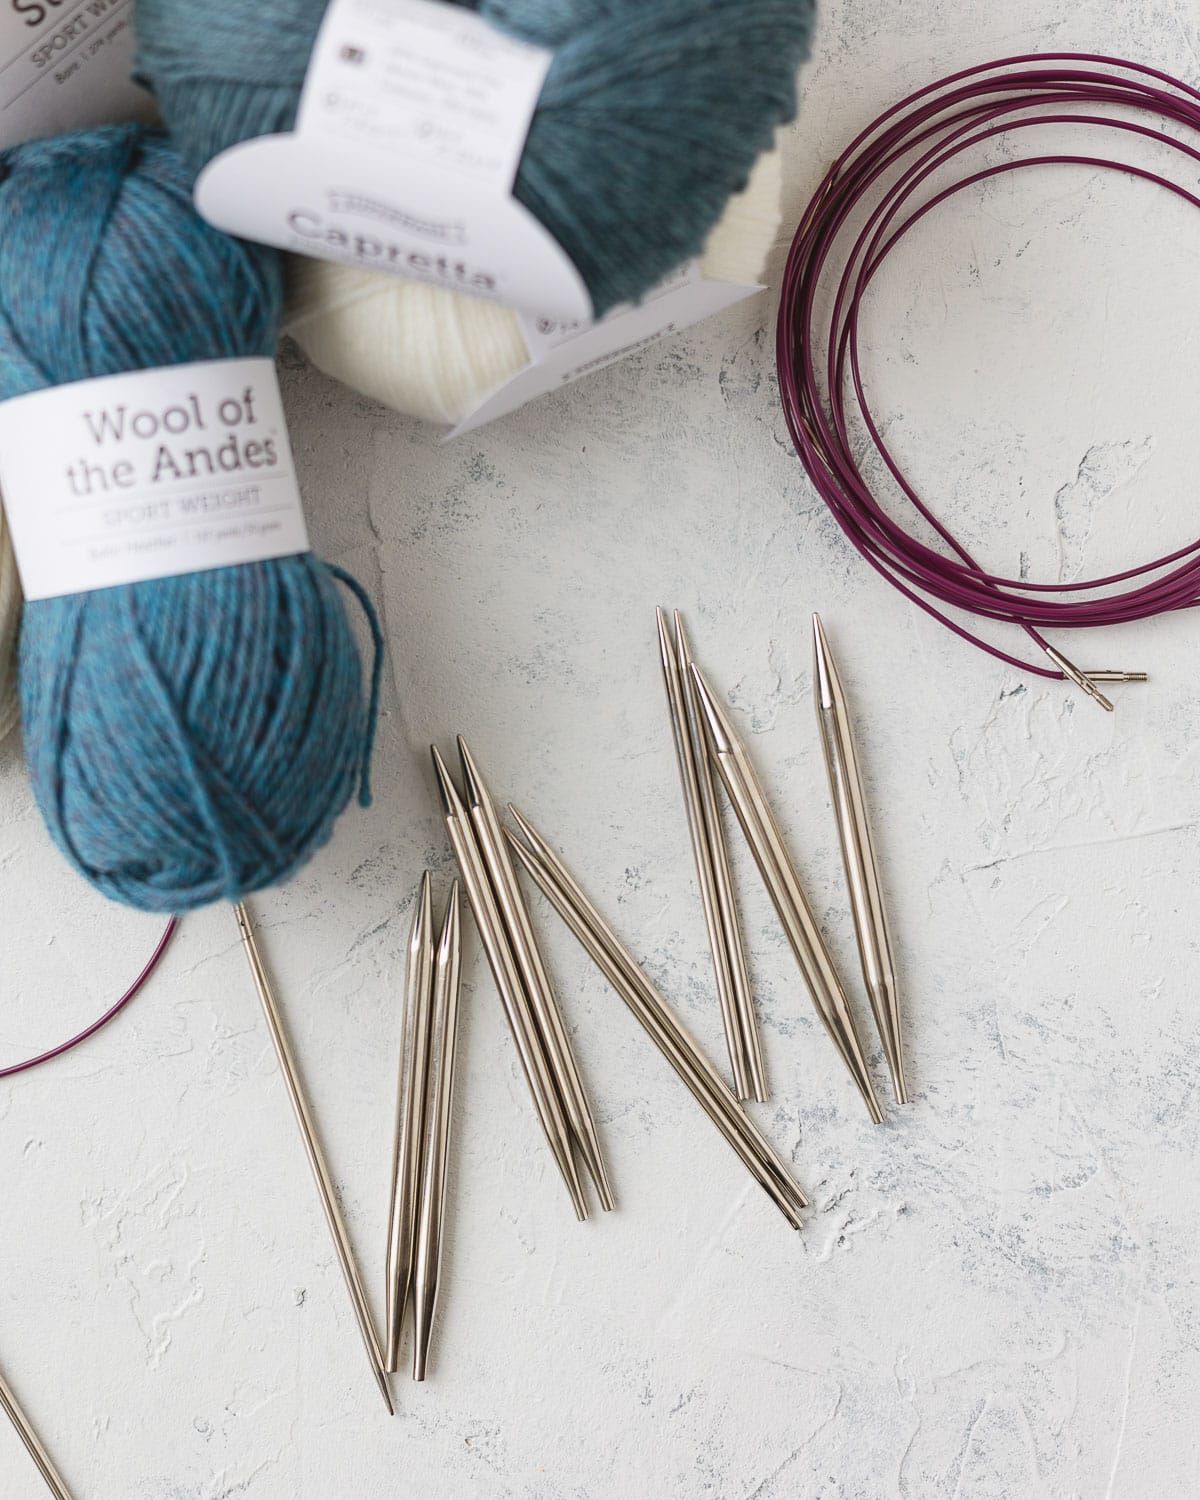 Nickel plated interchangeable knitting needle set, cables, and yarn.